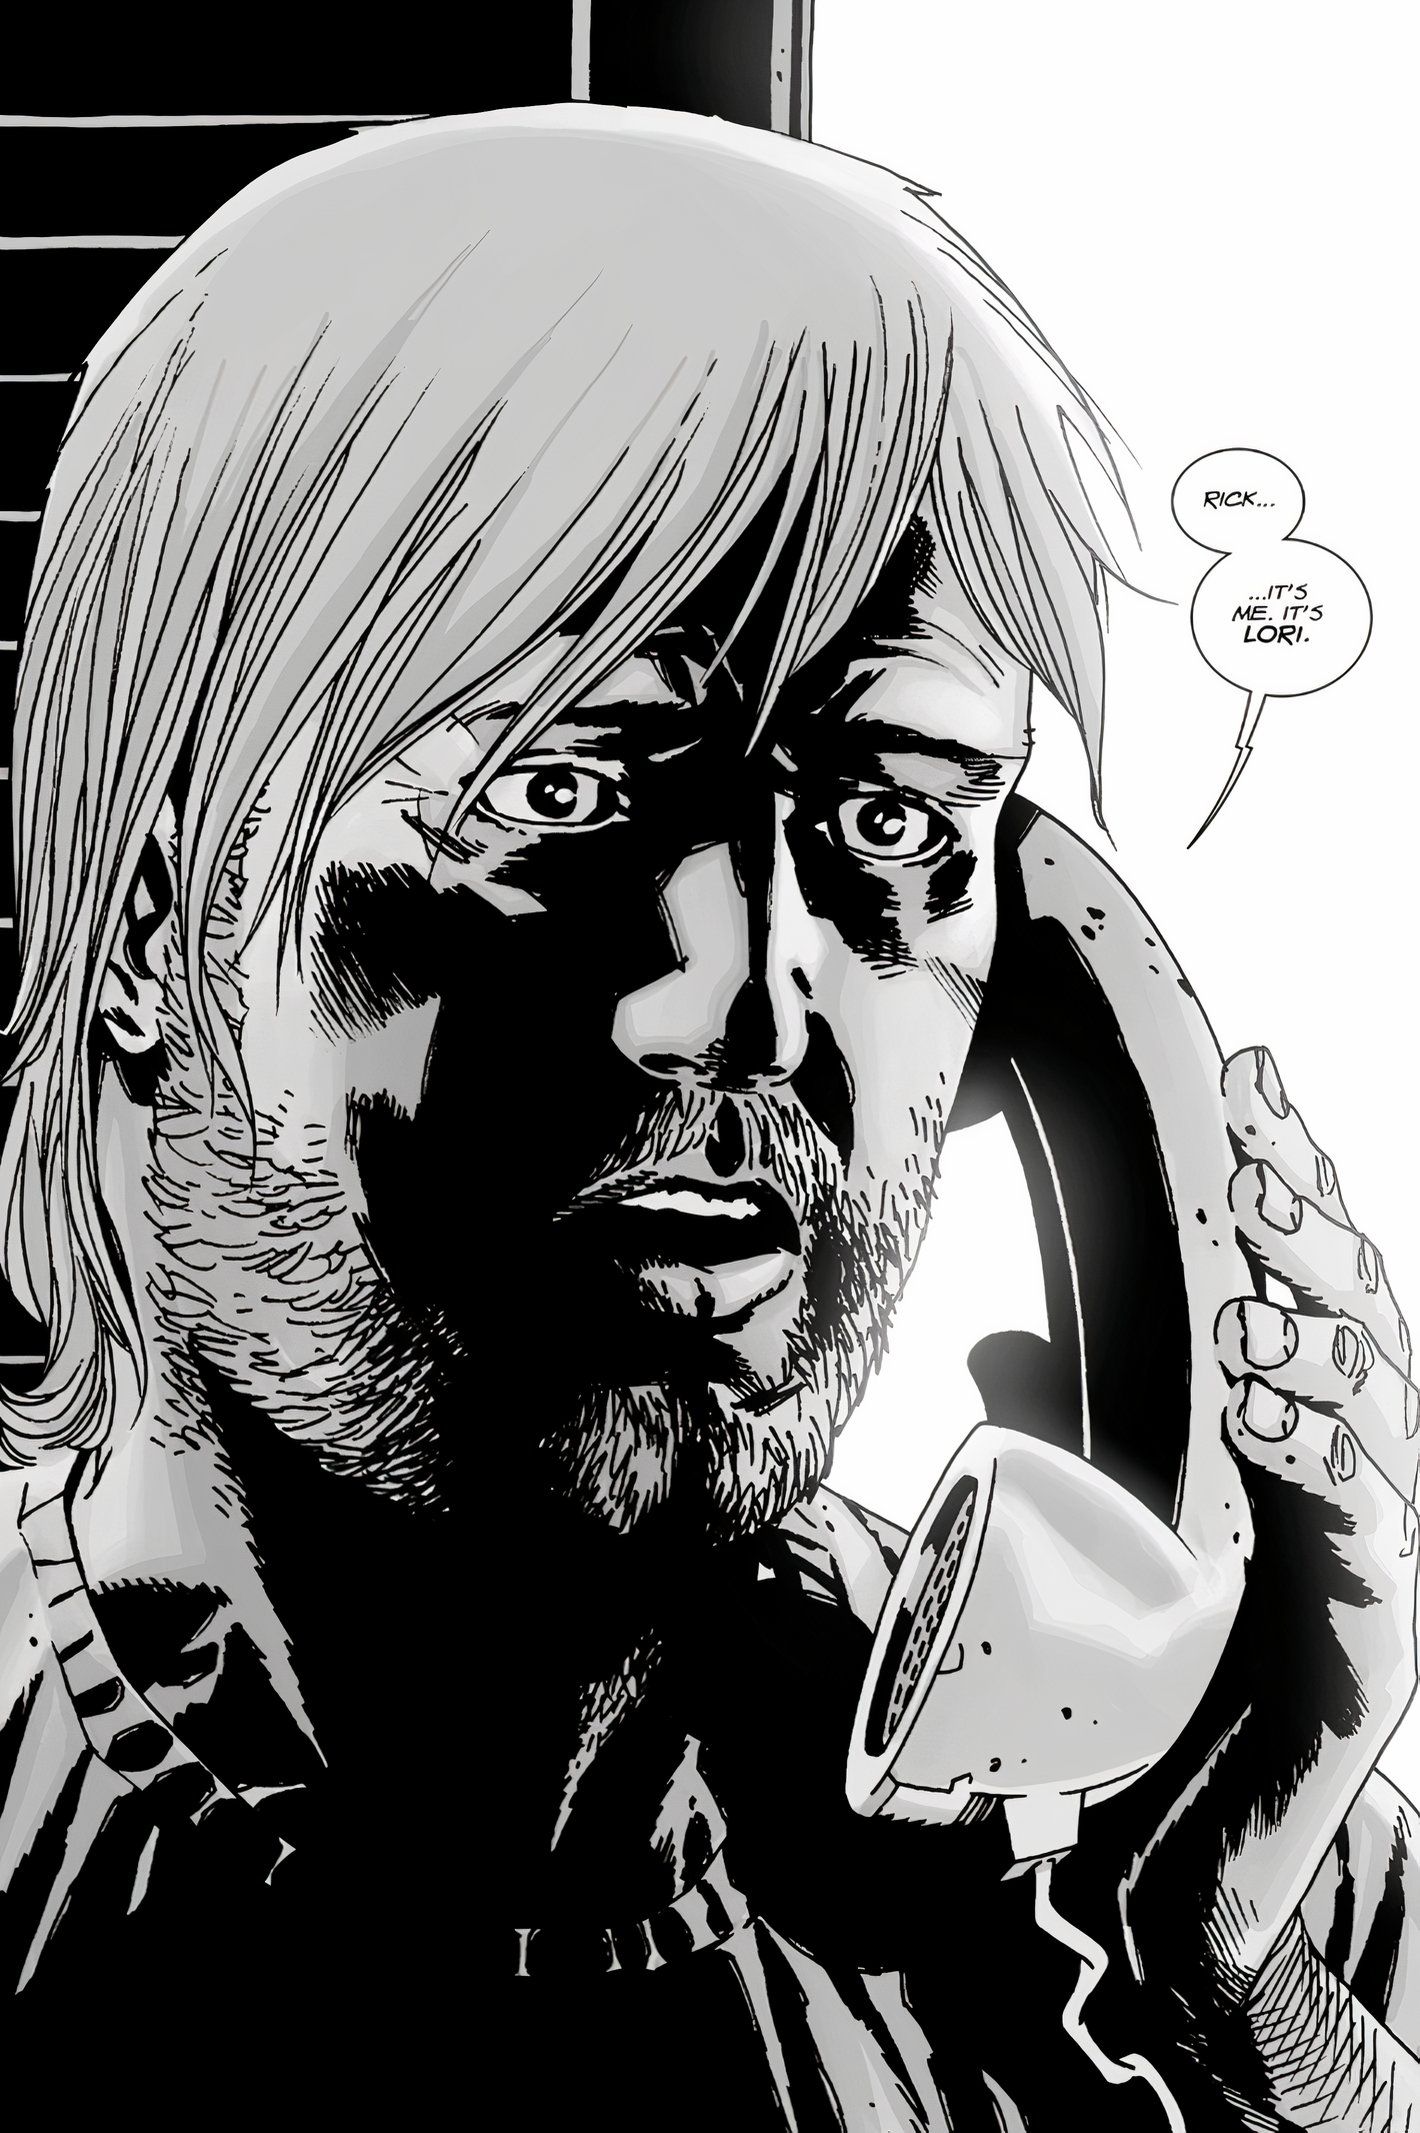 The Walking Dead #51, Rick is shocked with the voice on the phone says it is Lori